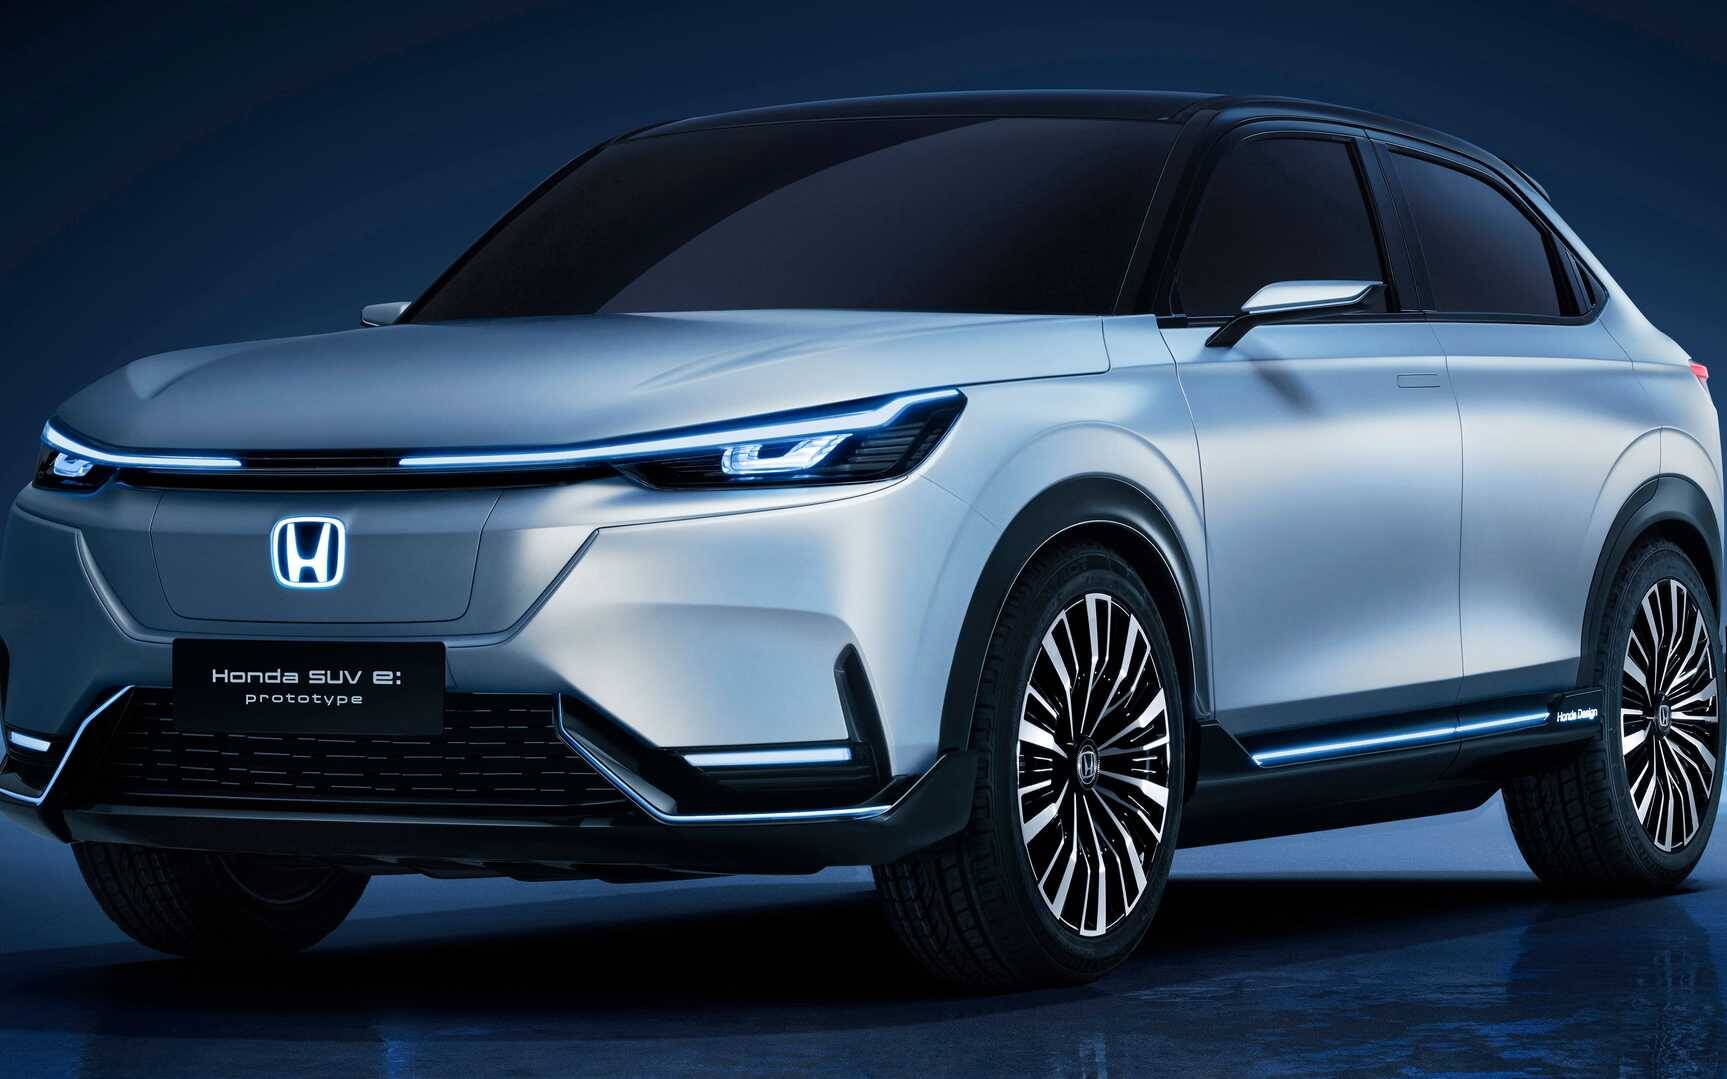 Honda Suv E Prototype Might Foreshadow Electric Hr V The Car Guide